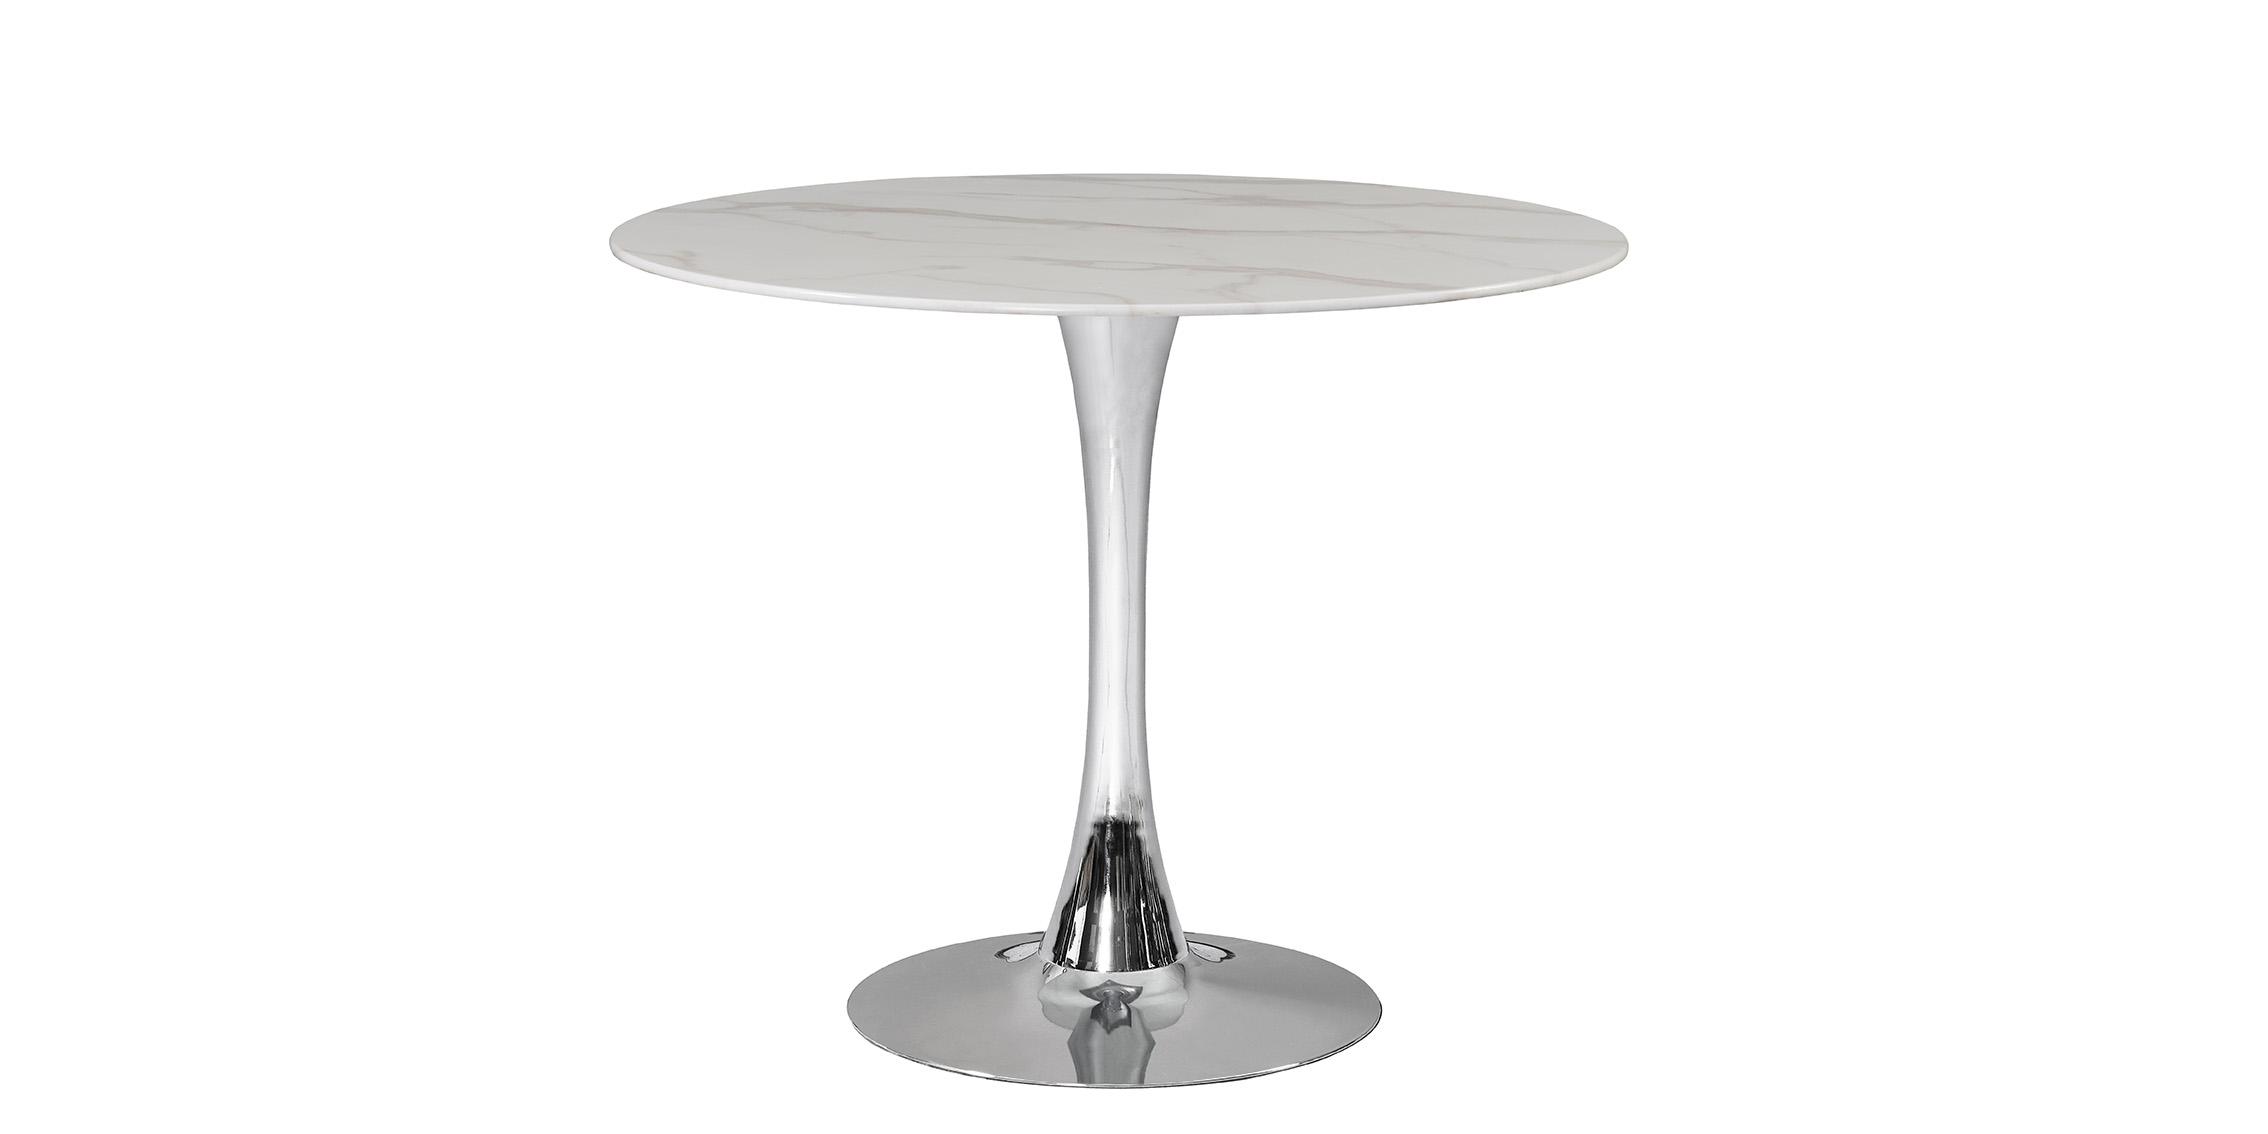 Contemporary, Modern Dining Table TULIP 972-T 972-T in White, Silver 